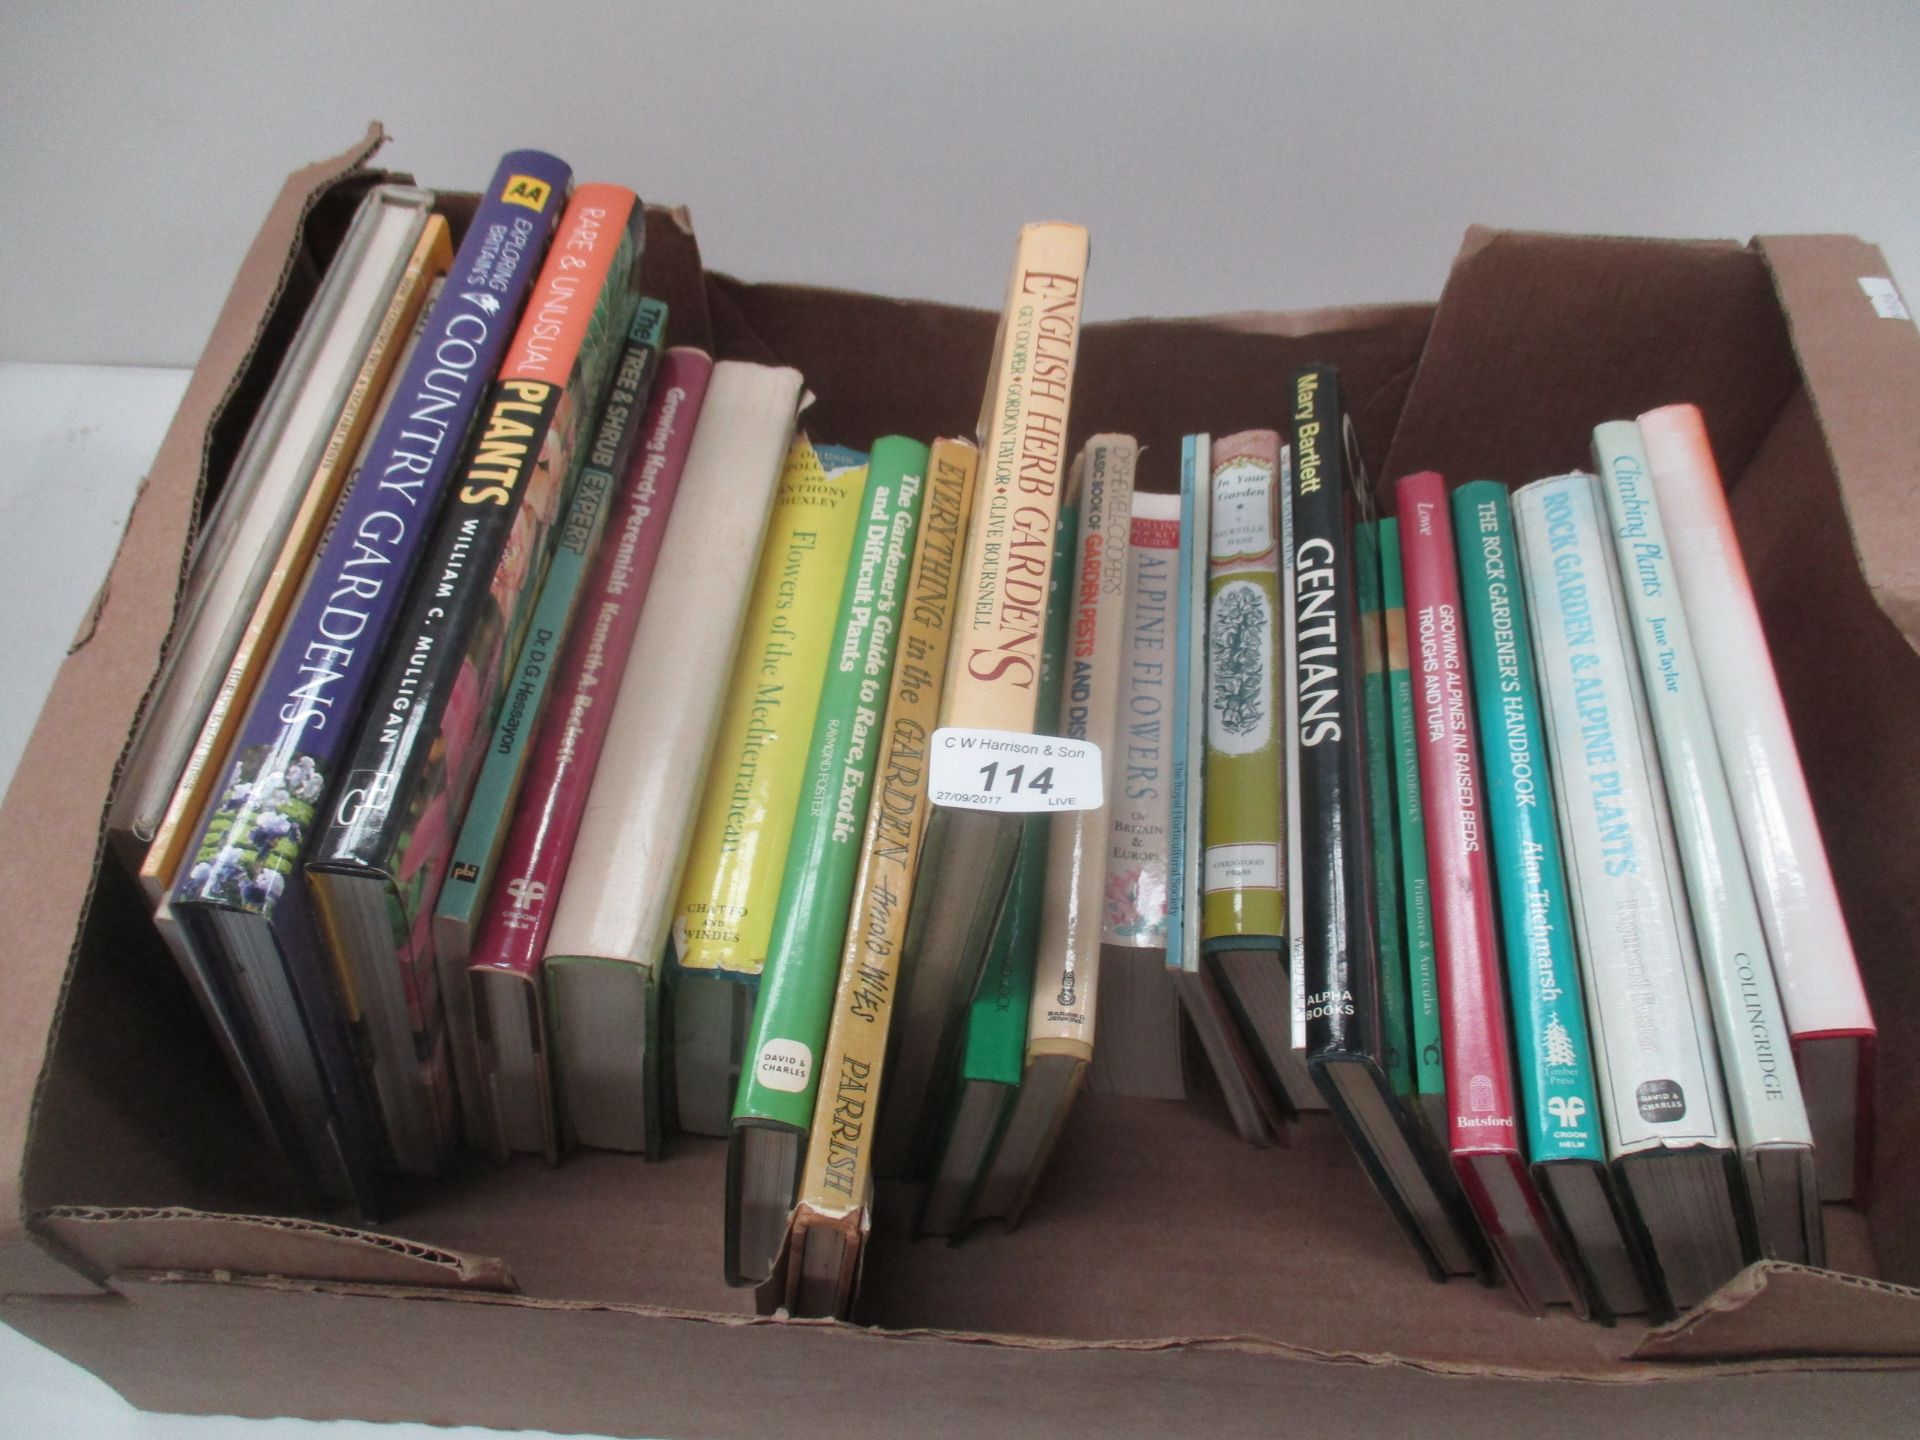 A box of assorted gardening books.